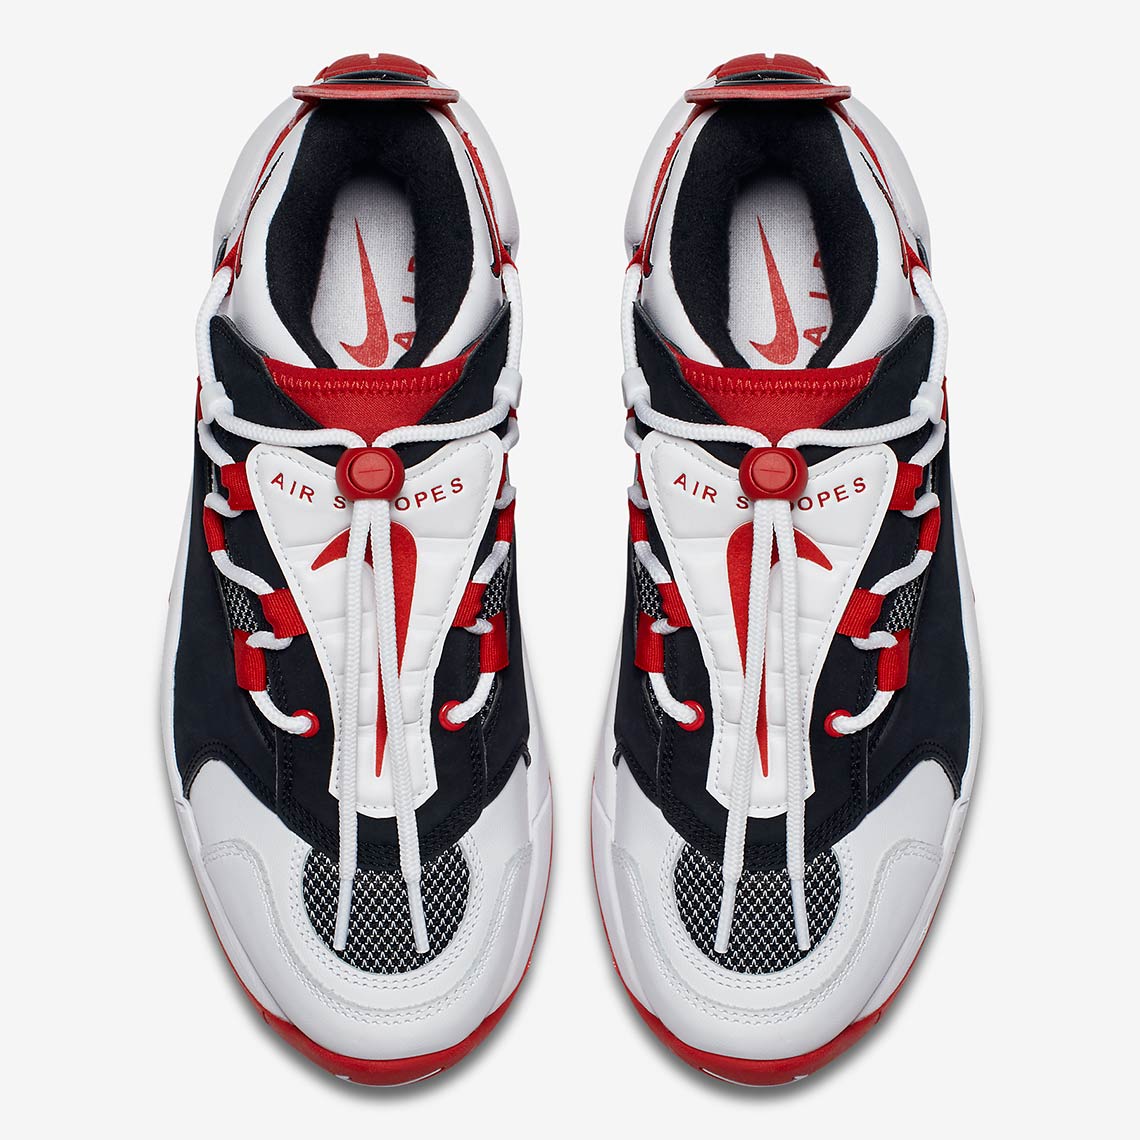 Nike Air Swoopes 2 917592 100 White Red 4